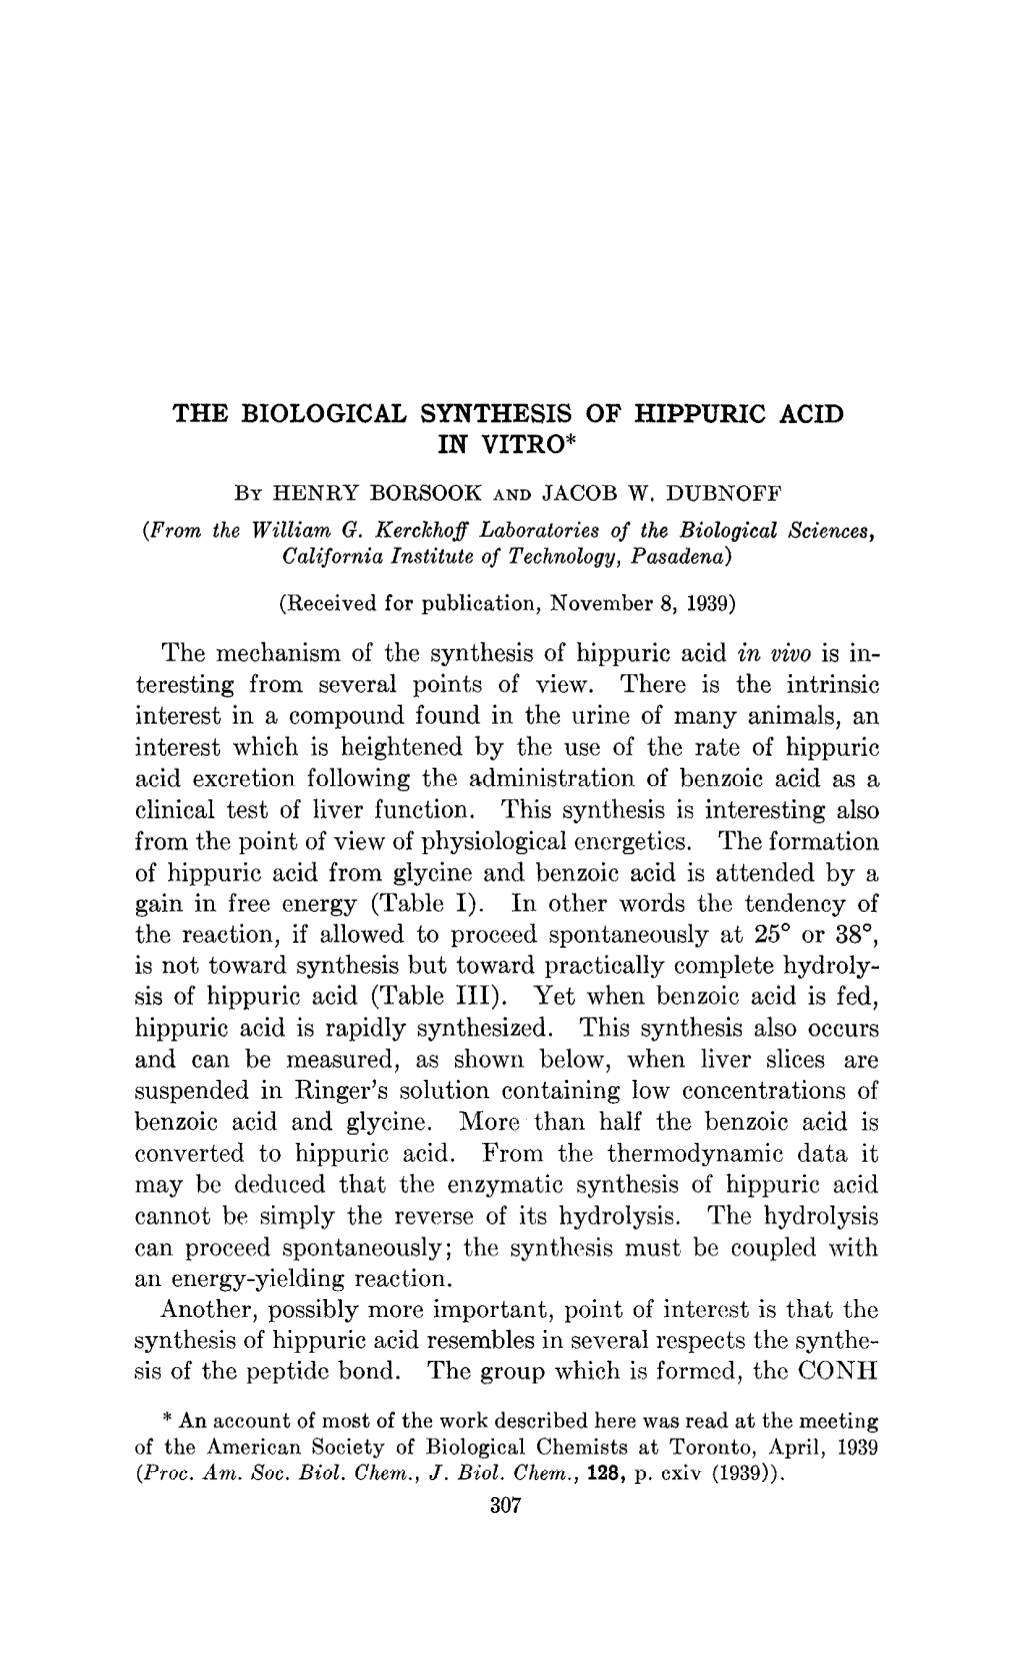 THE BIOLOGICAL SYNTHESIS of HIPPURIC ACID in VITRO* California Institute of Technology